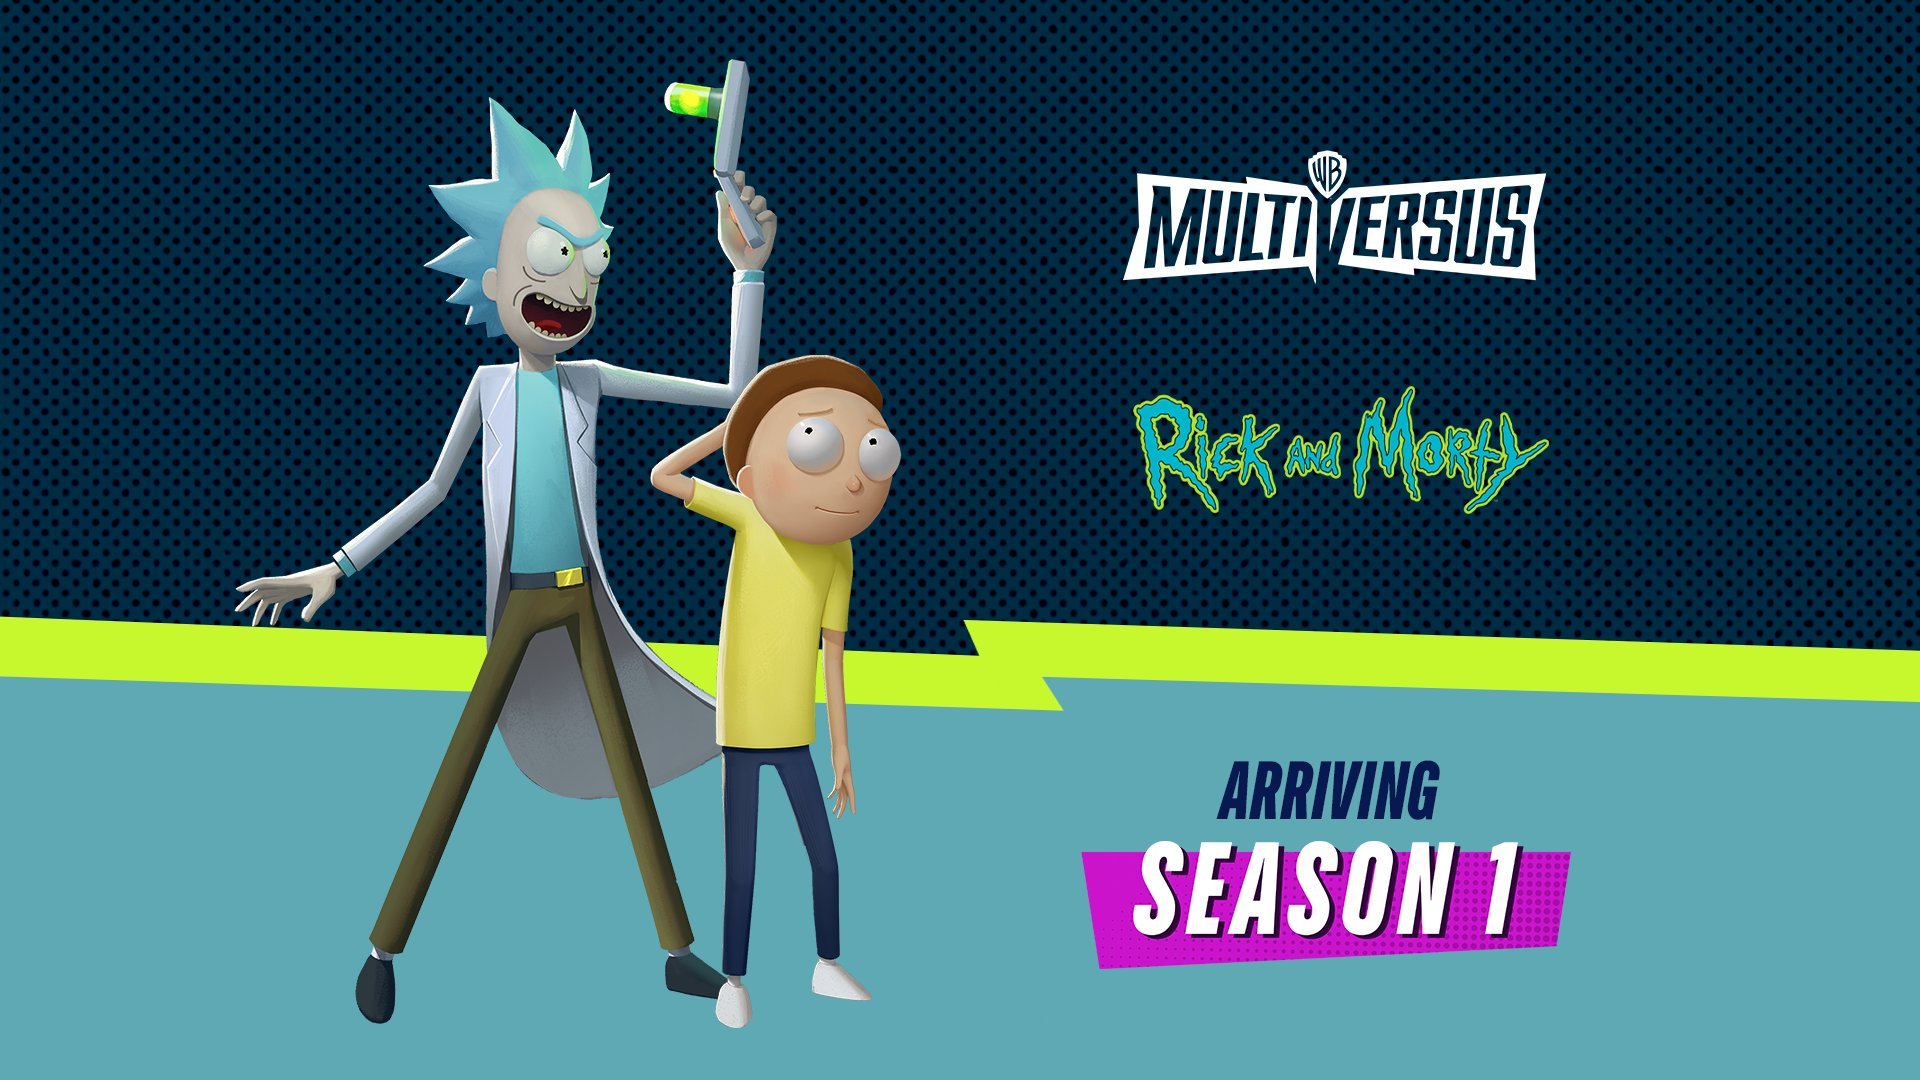 Rick and Morty Posts New Season 6 Images Ahead of S06E01 Solaricks!